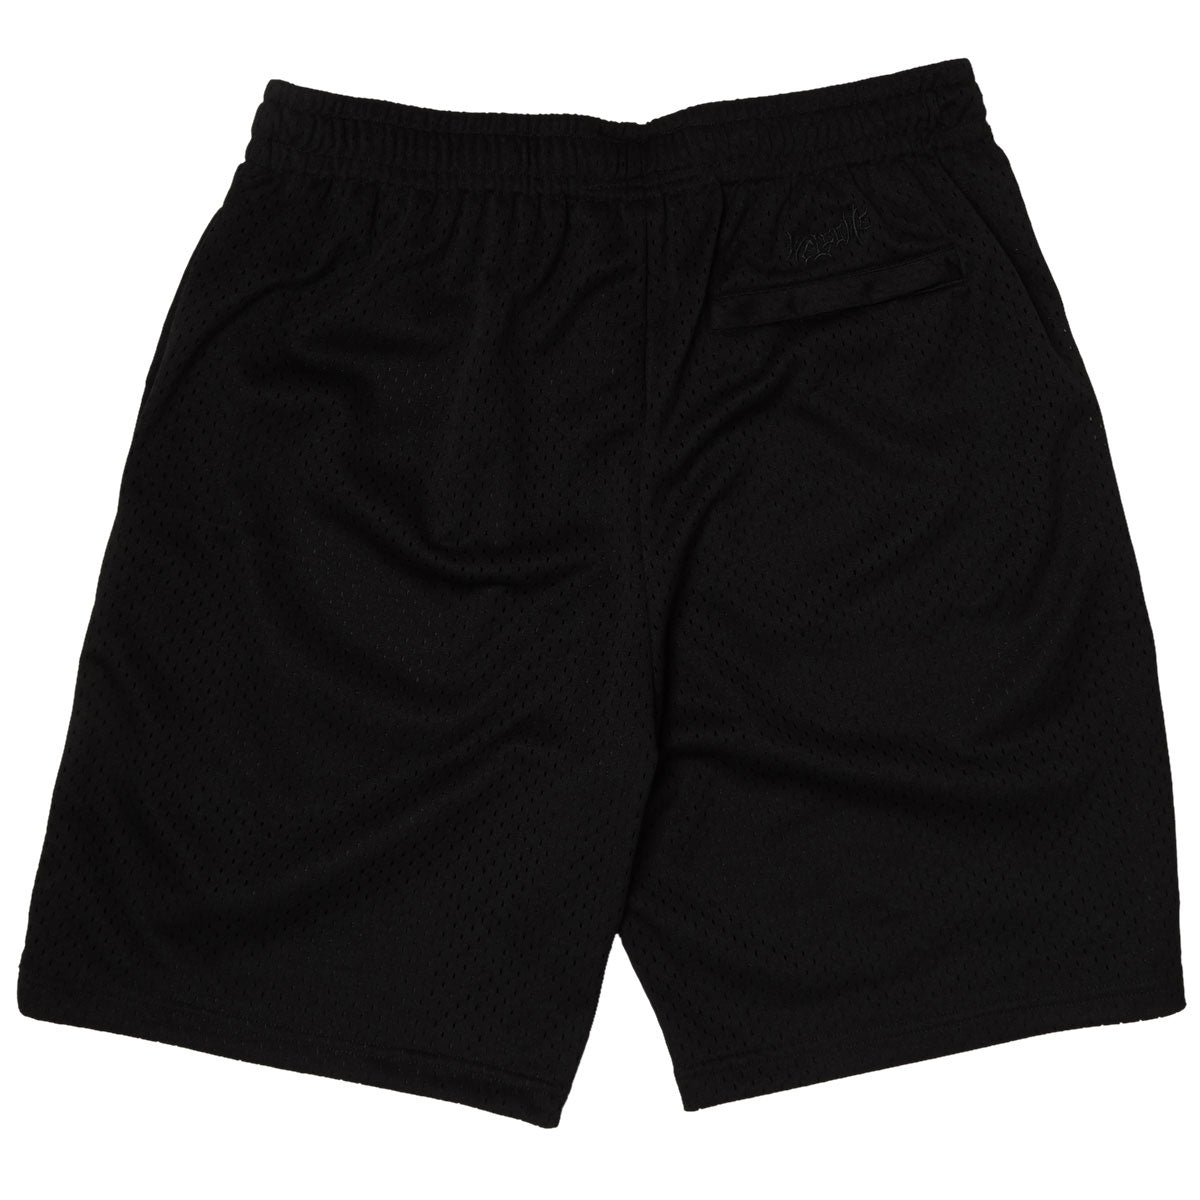 Welcome Barb Mesh Shorts - Black image 2